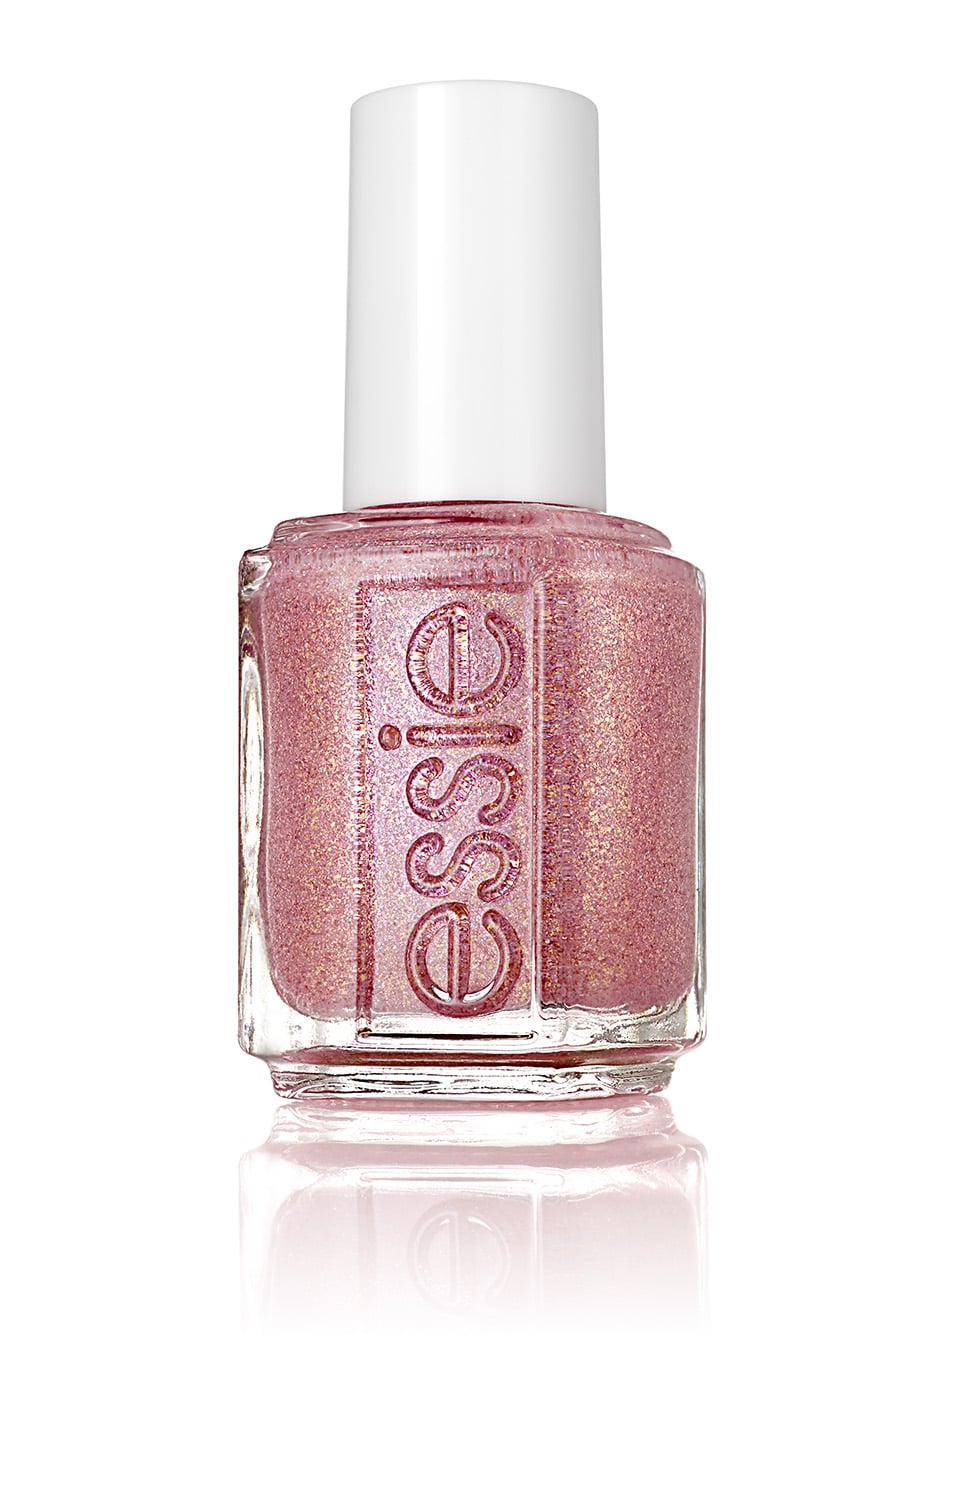 Beat of the Moment | I Just Added Every Shade of Essie's New Glitter Nail Polish to My Shopping Cart | POPSUGAR Beauty Photo 2